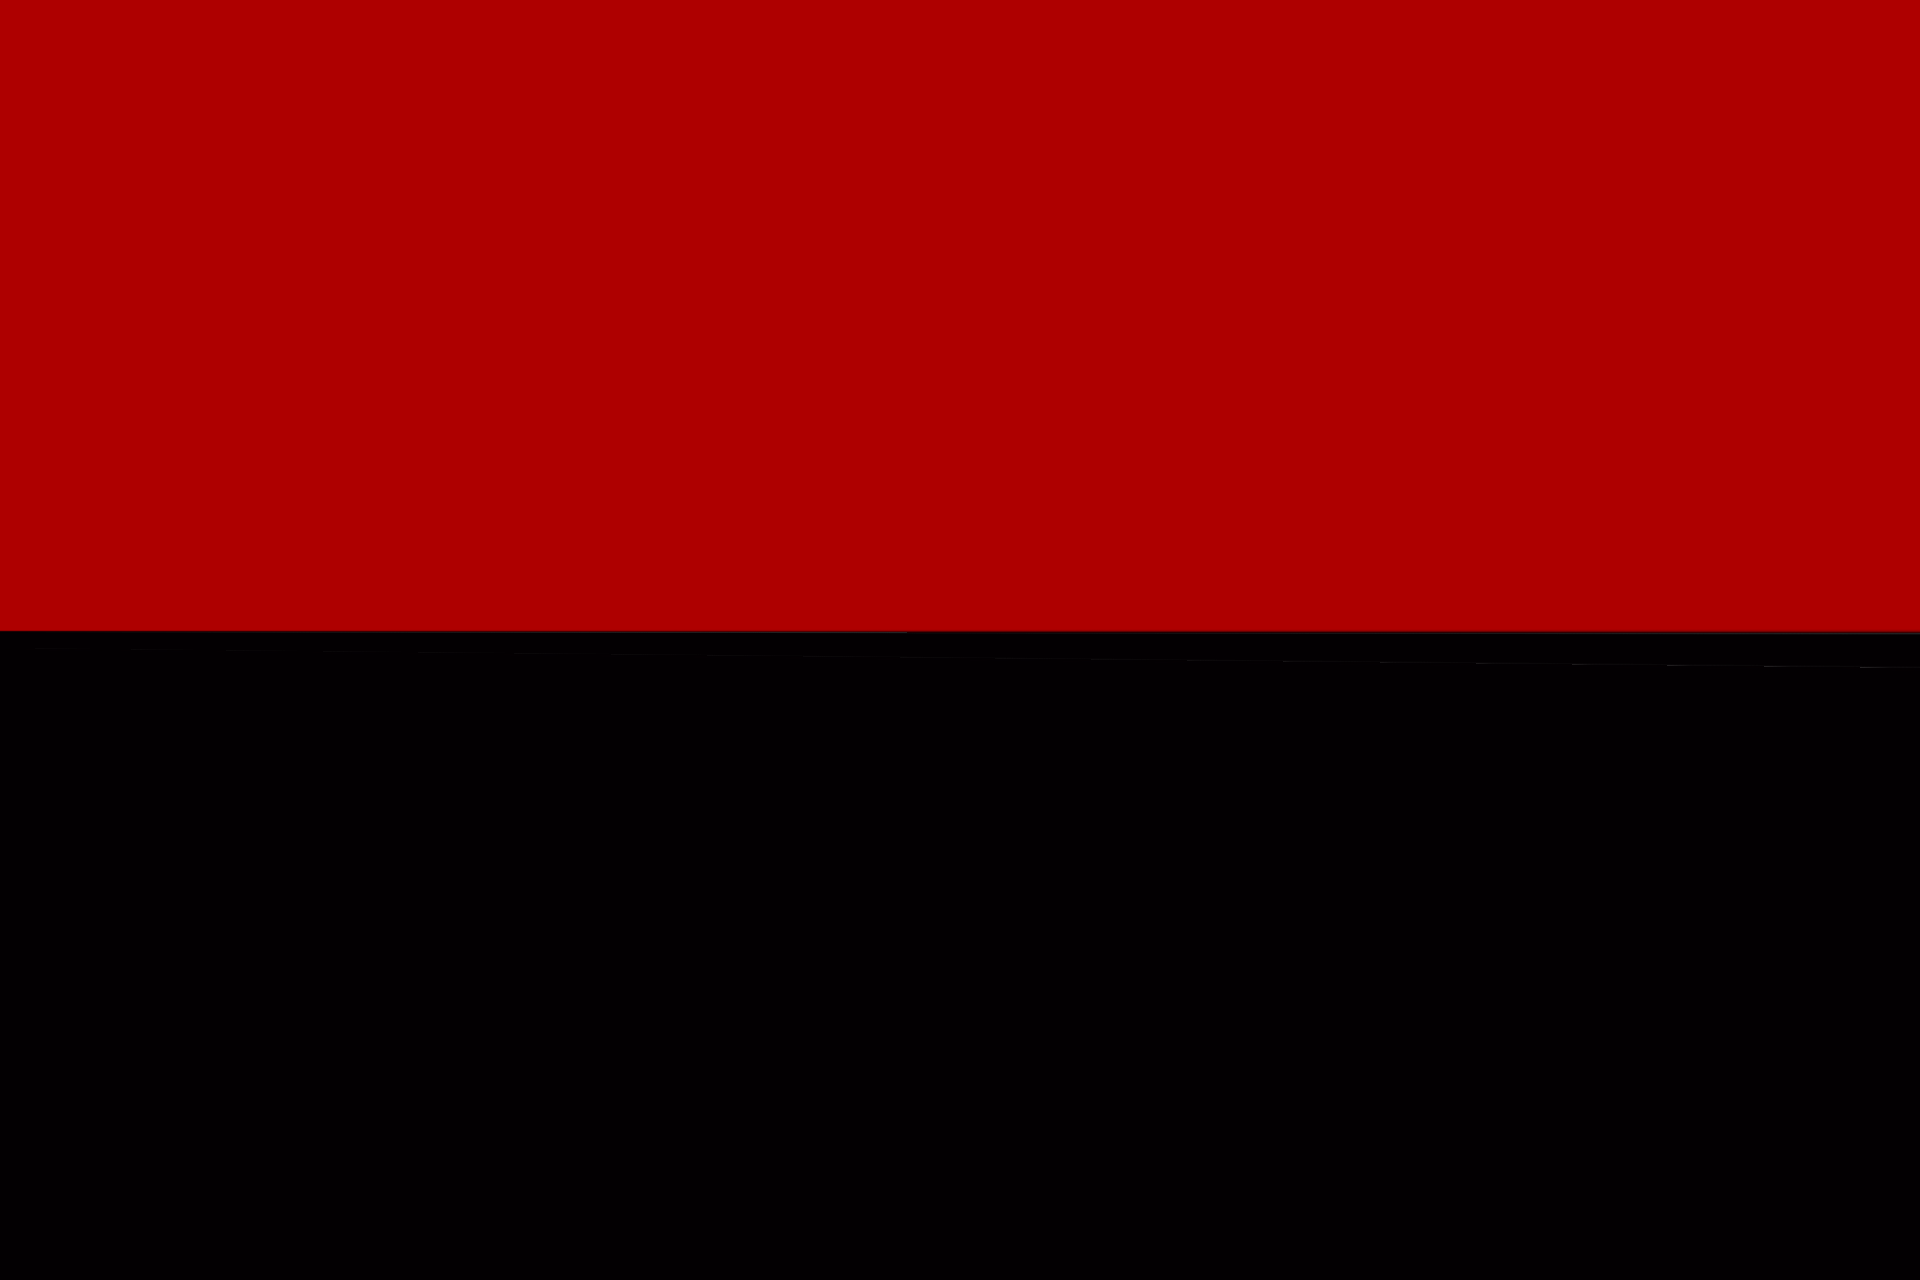 Civil_Flag_of_the_Tsingchurian_Hsinminist_Party.png